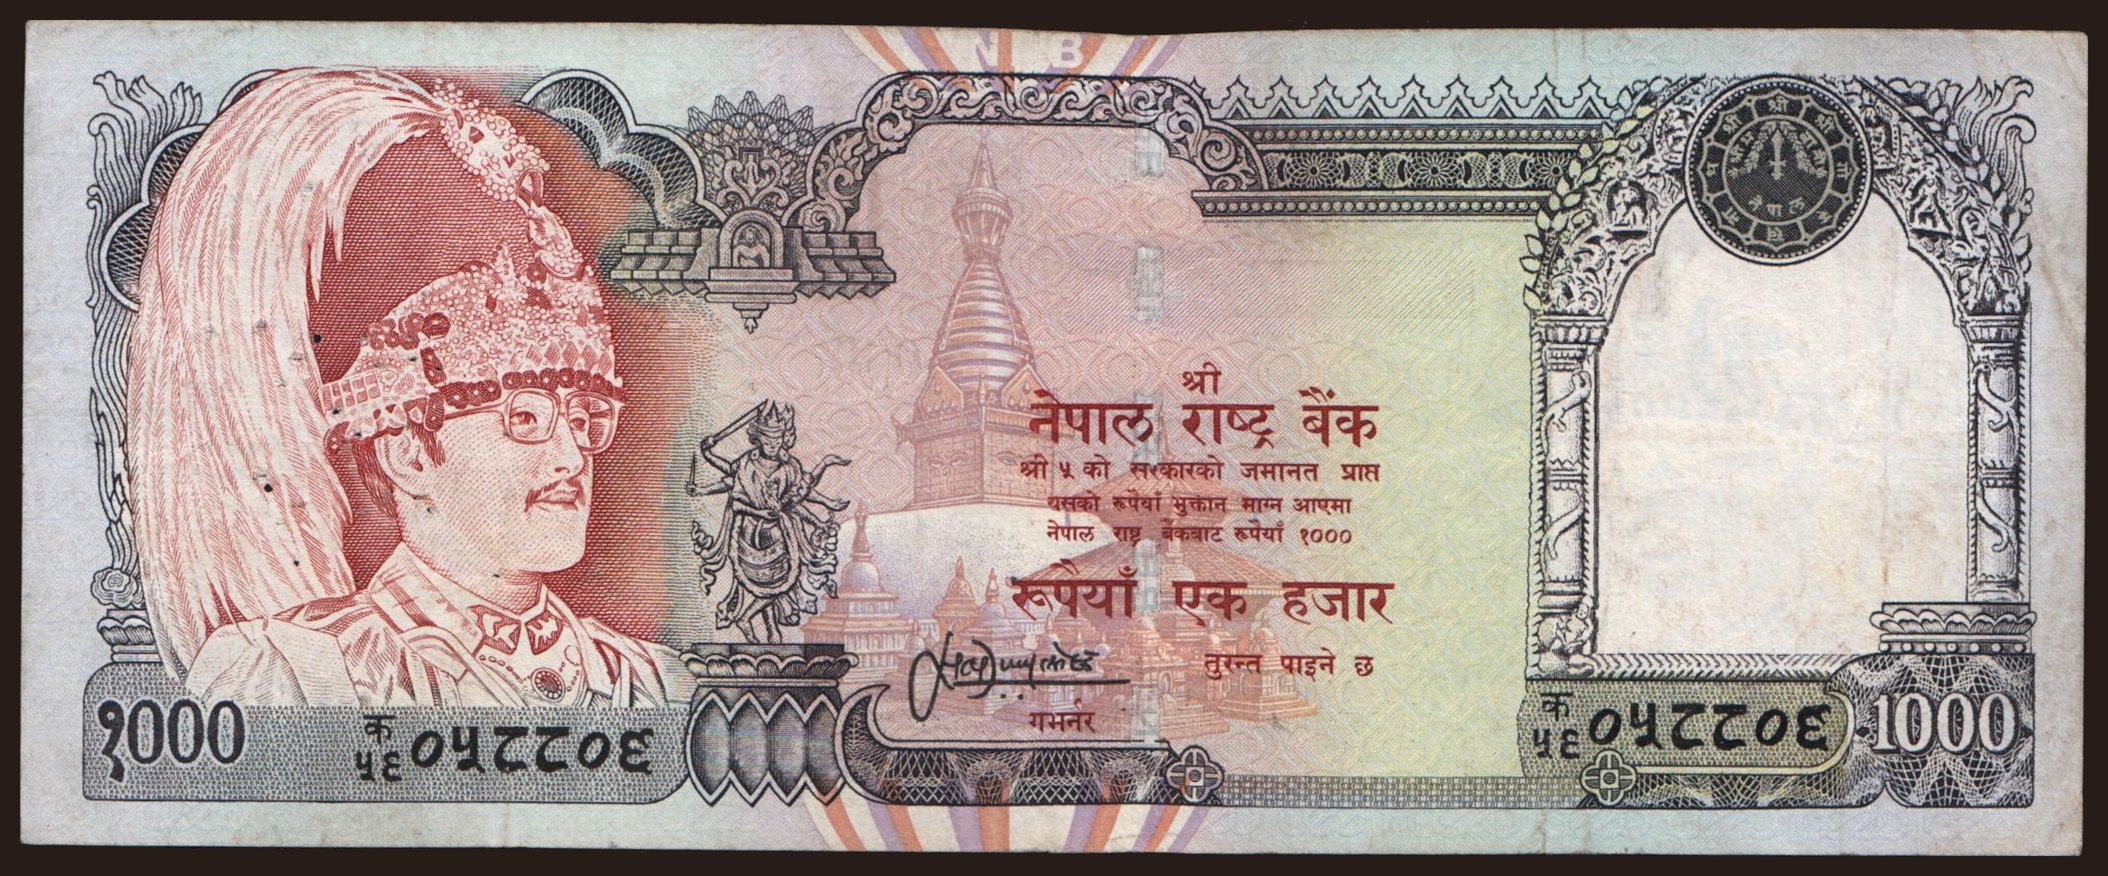 1000 rupees, 1996